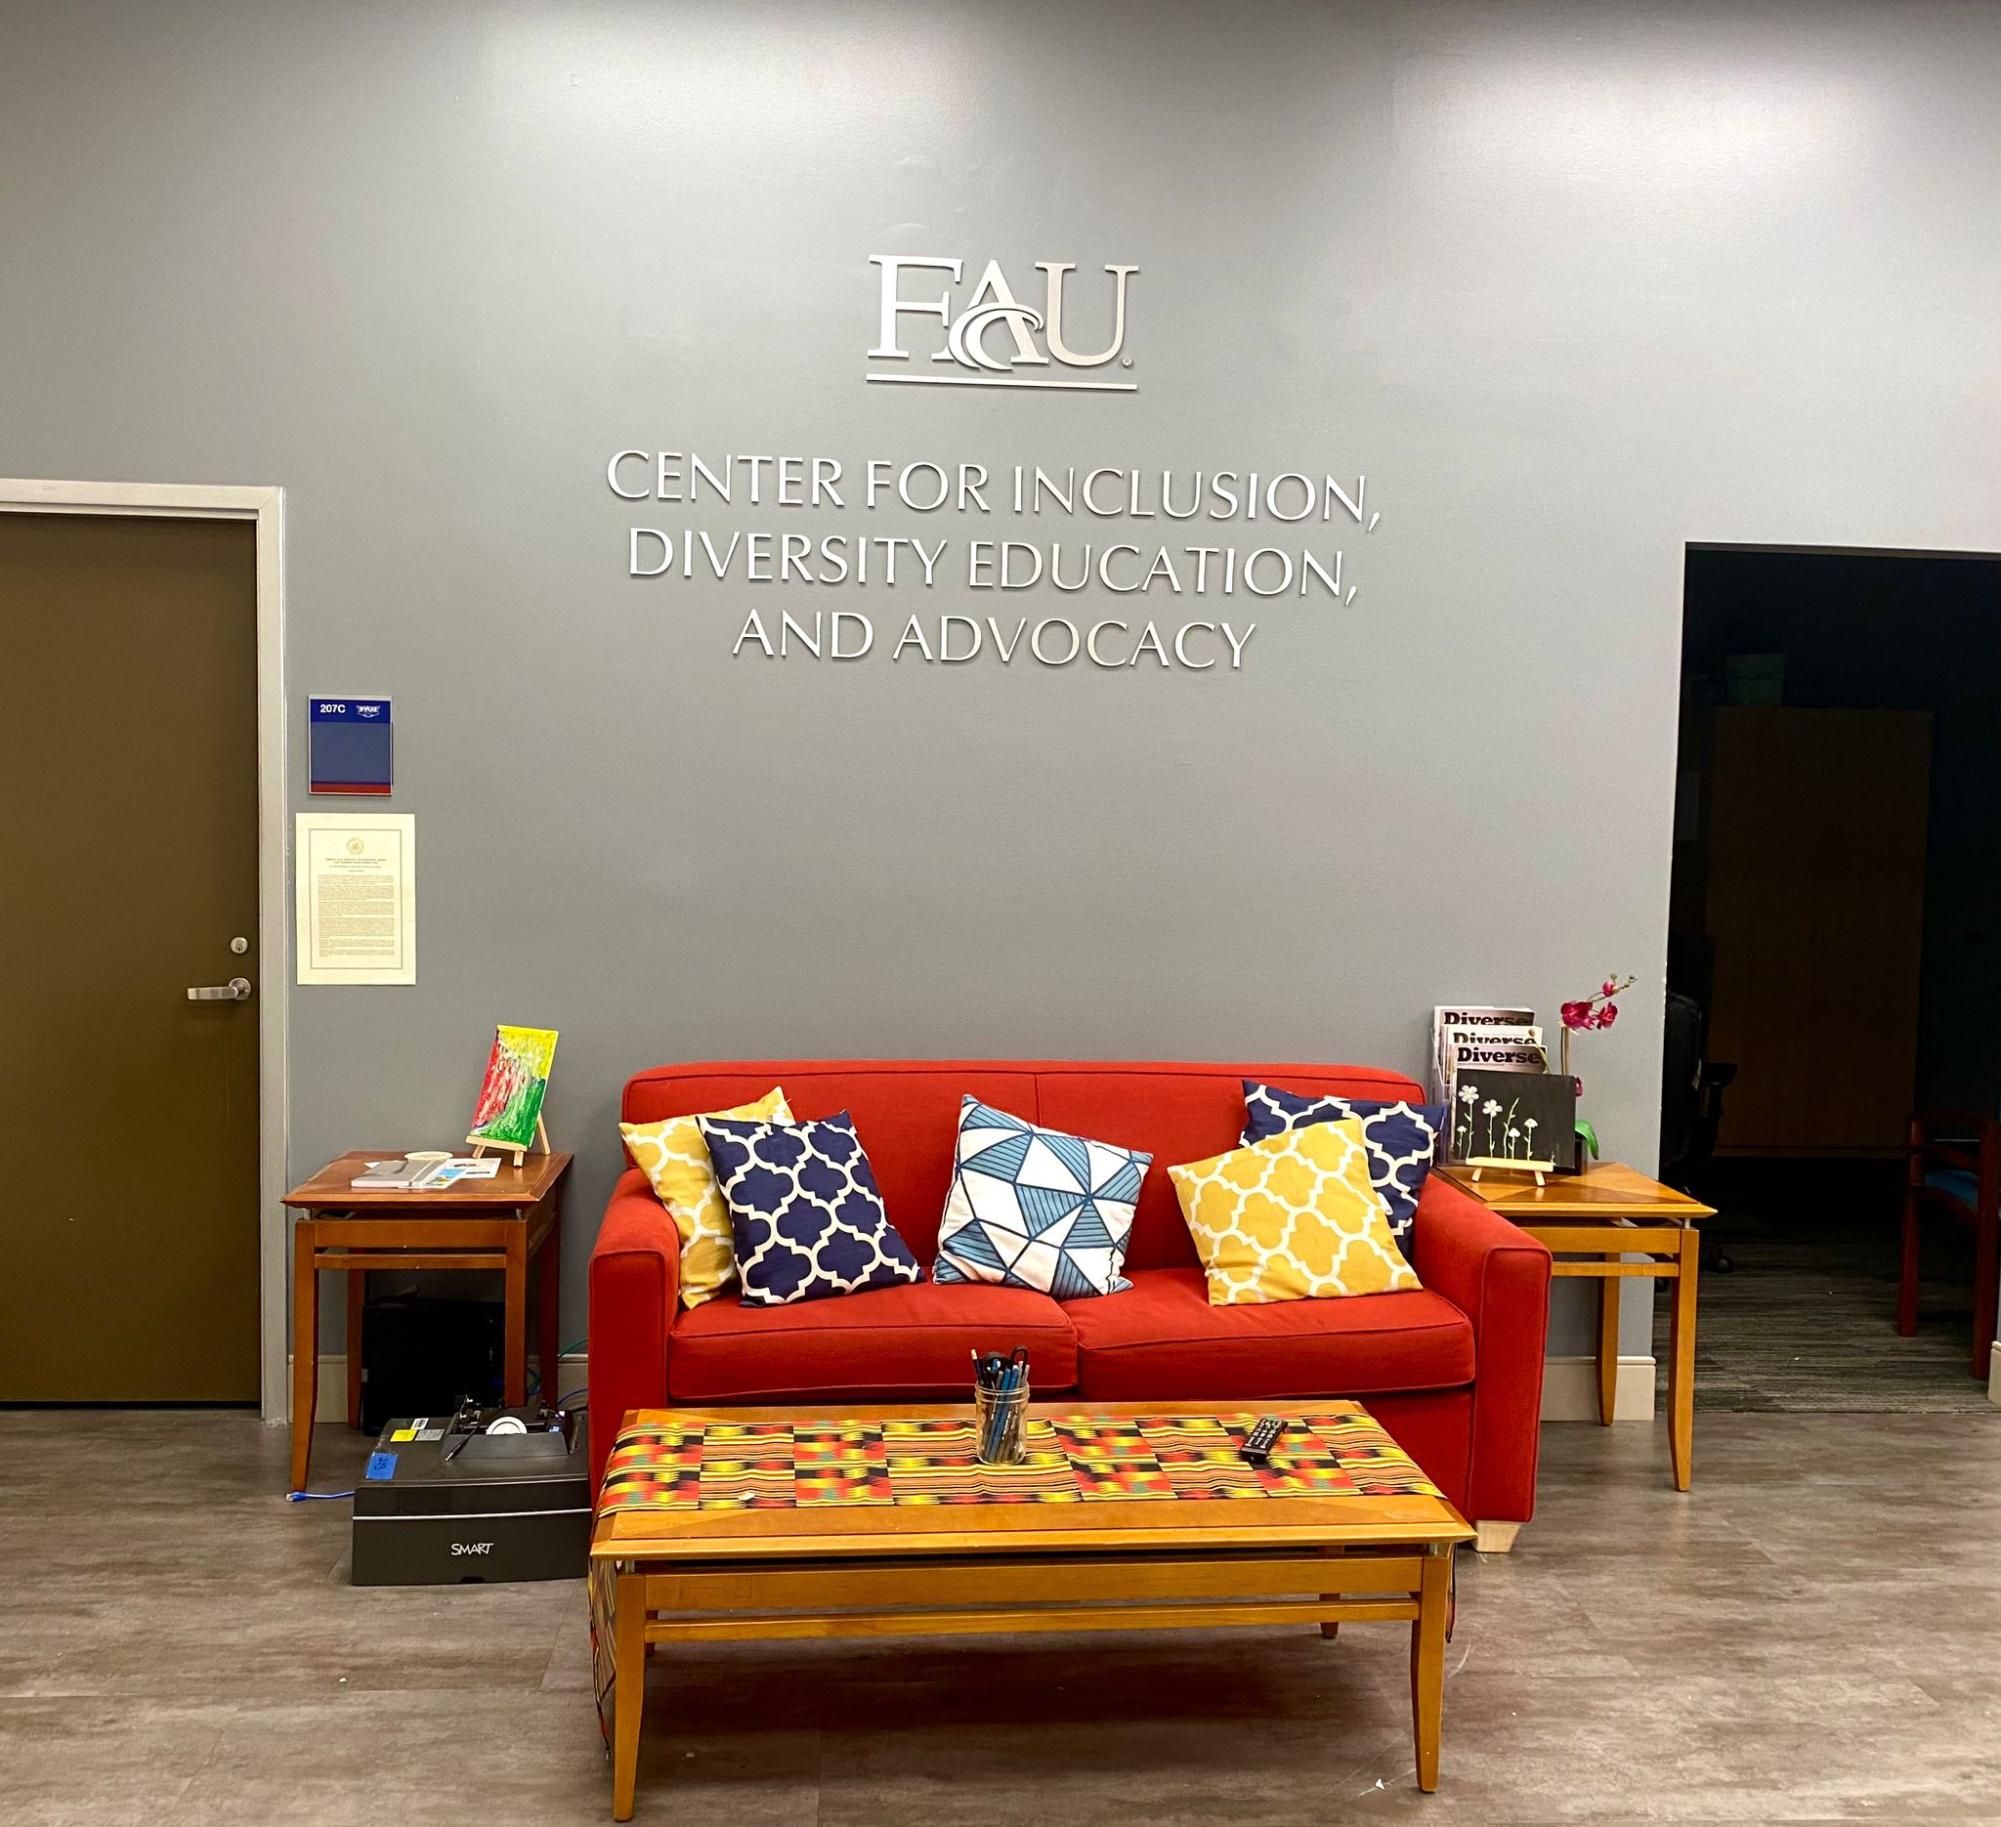 FAU Center for Inclusion, Diversity Education and Advocacy.